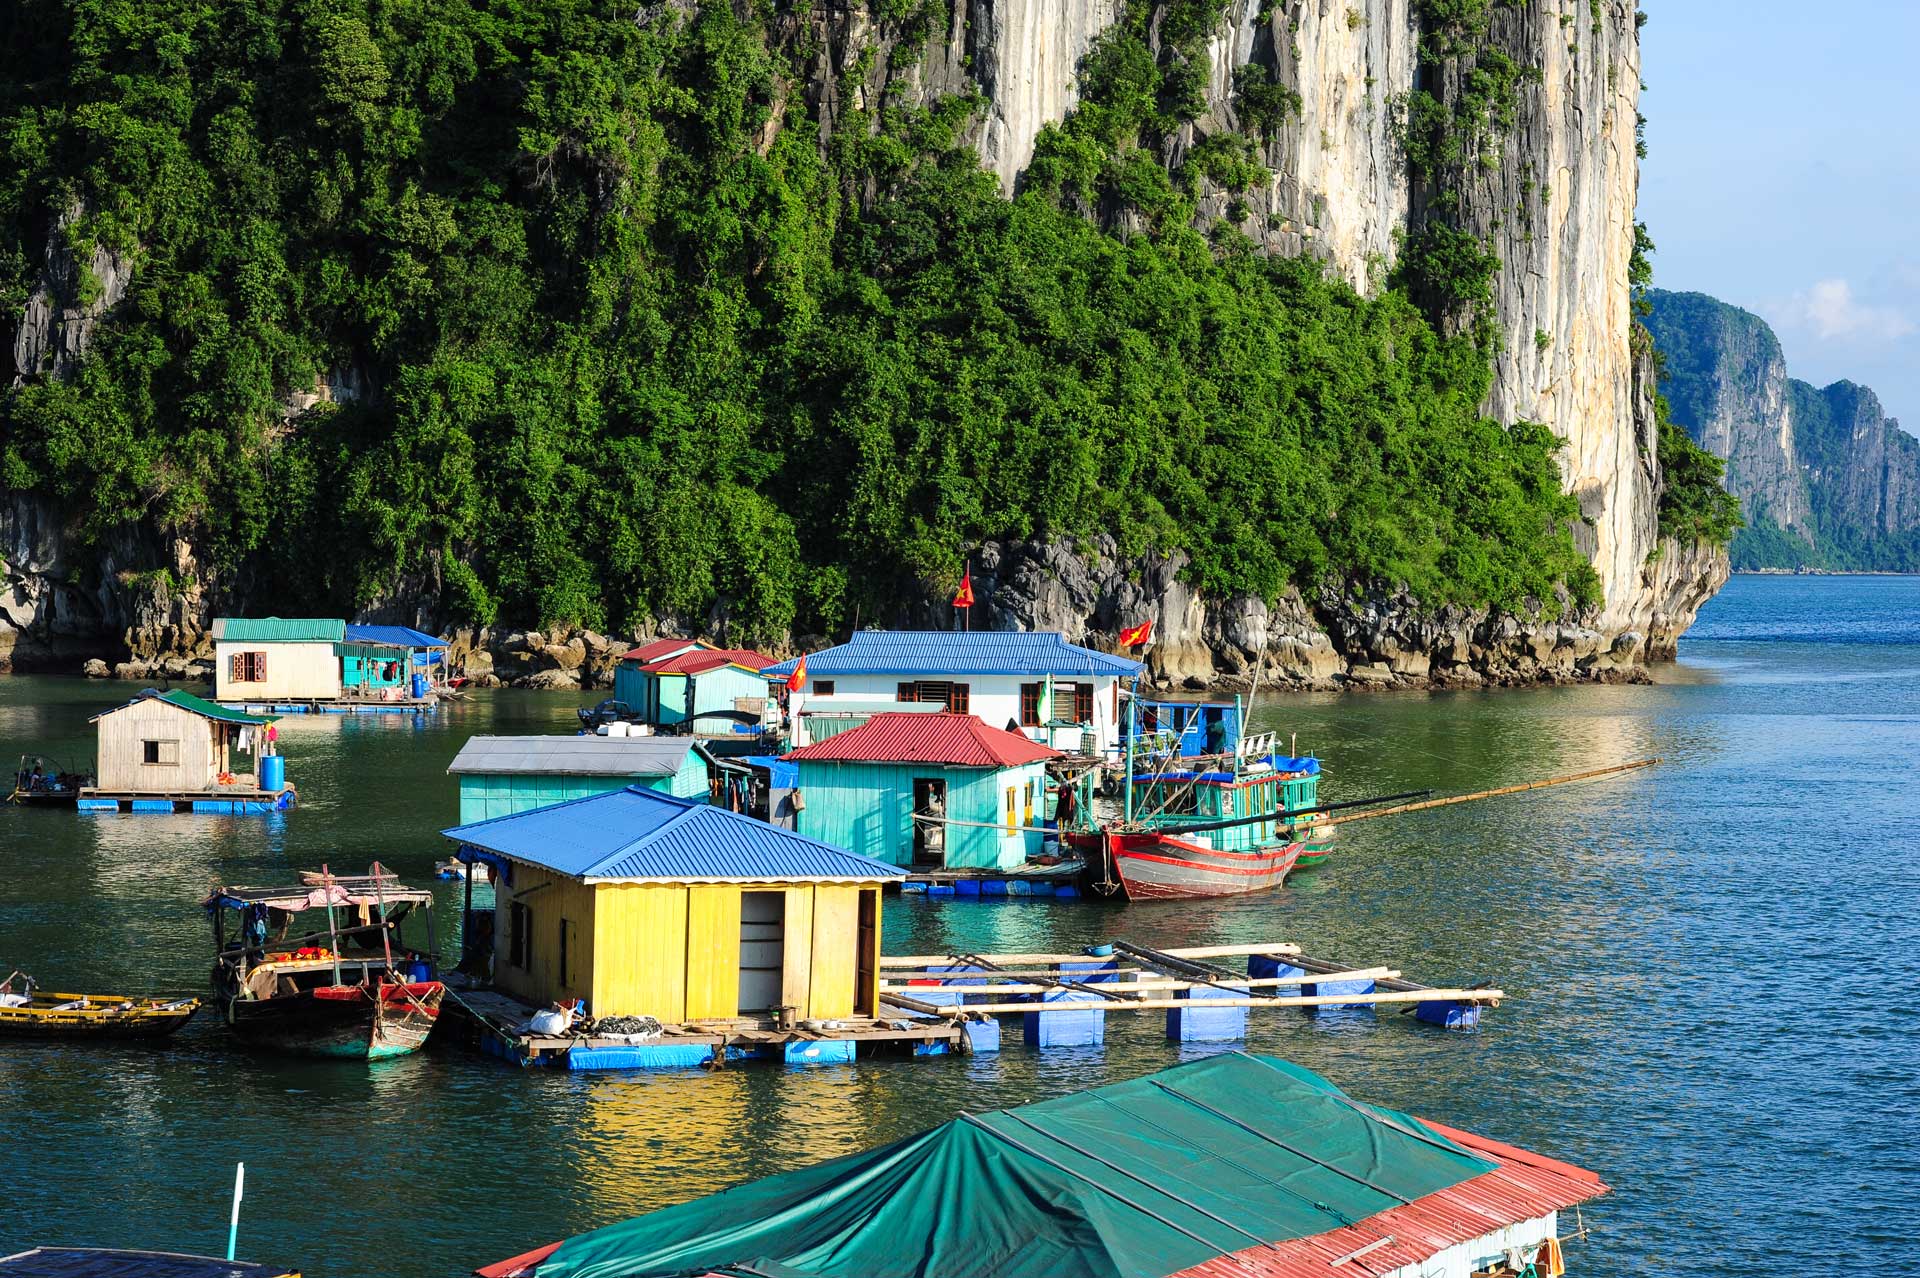 Floating houses in Halong bay,Vietnam.